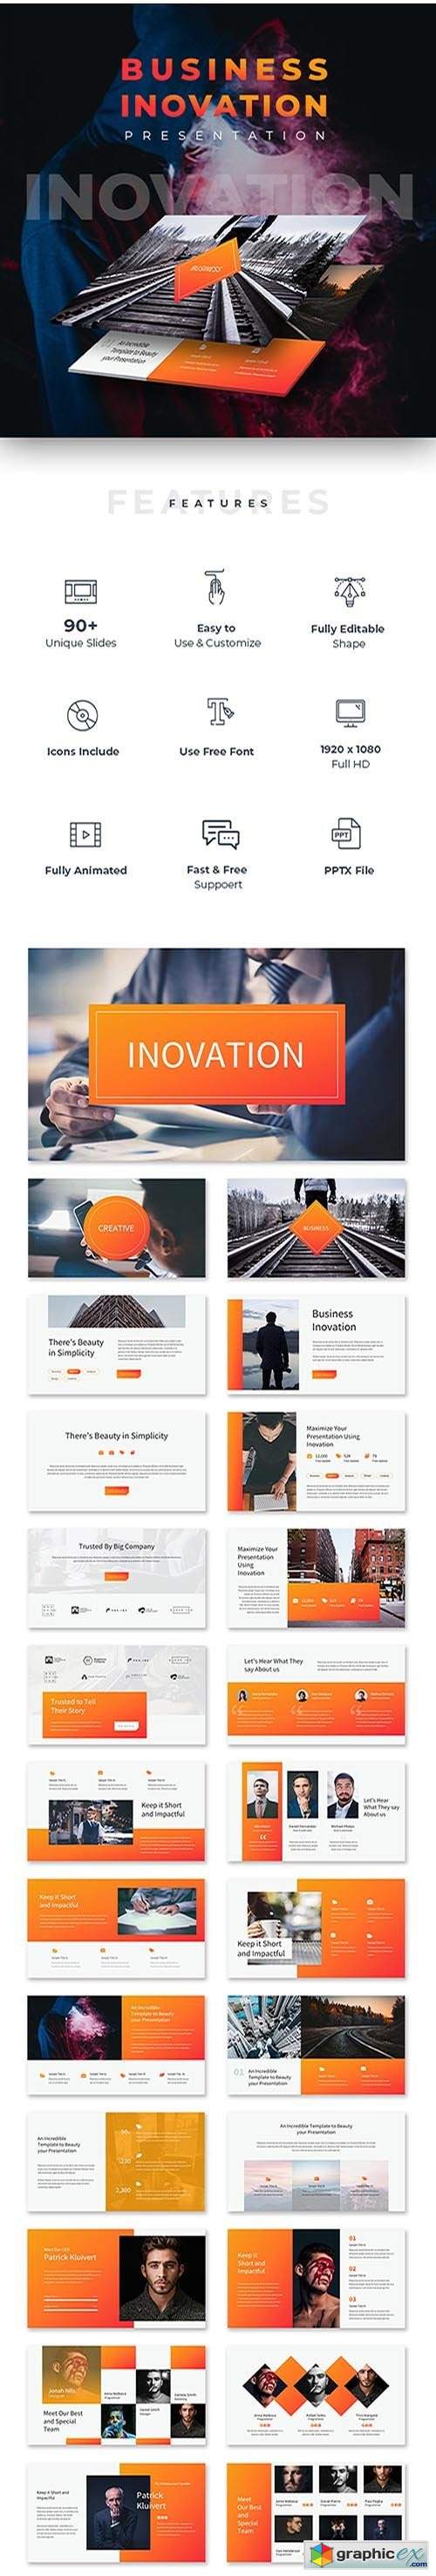 Business Inovation Powerpoint Template